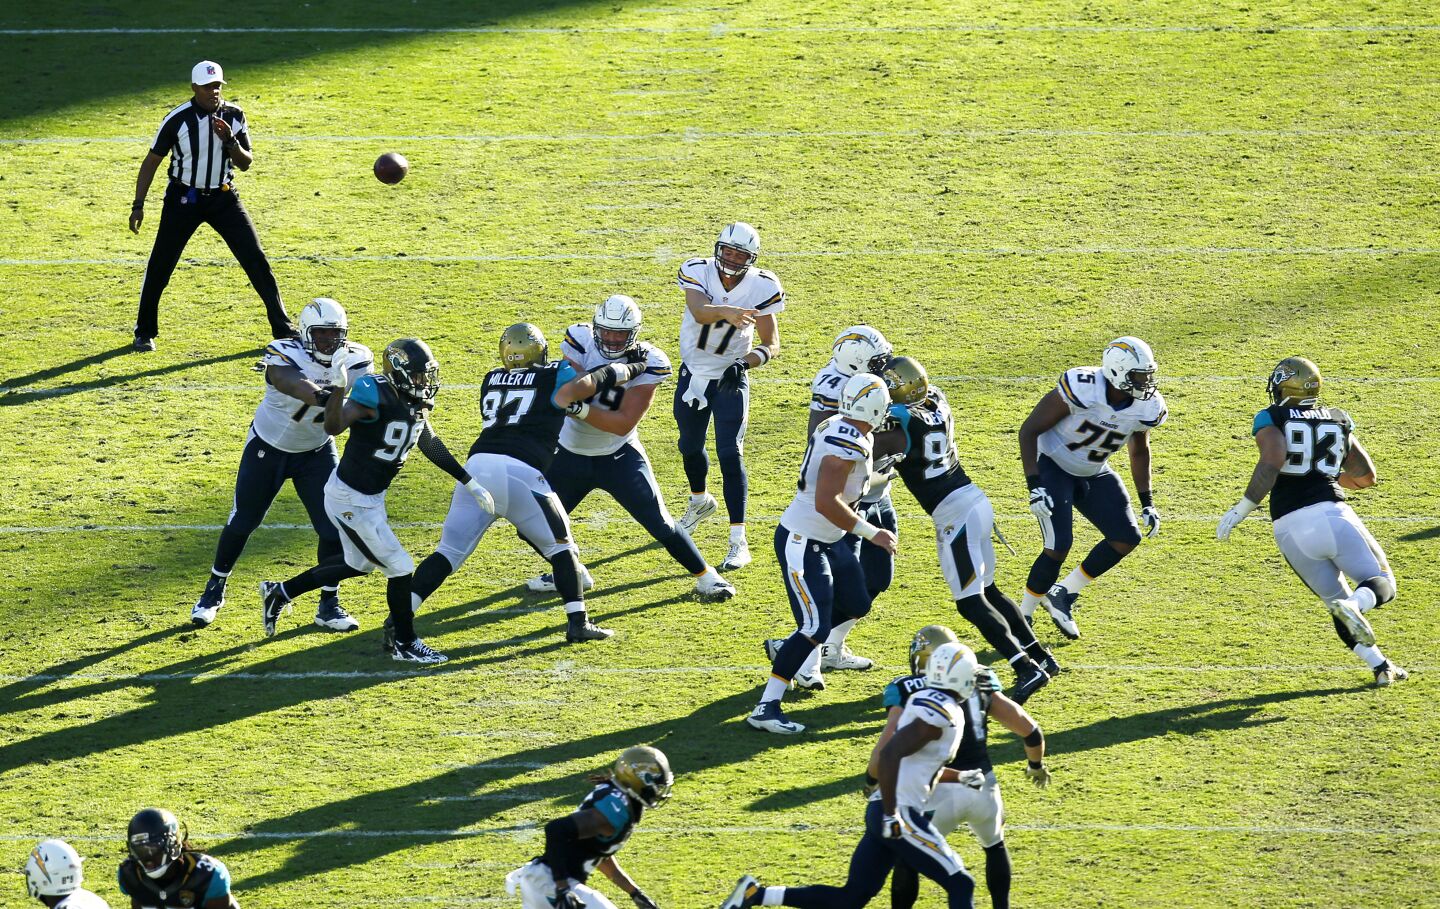 San Diego Chargers Philip Rivers throws to Ladarius Green against Jacksonville in the 4th quarter on Nov. 29, 2015.